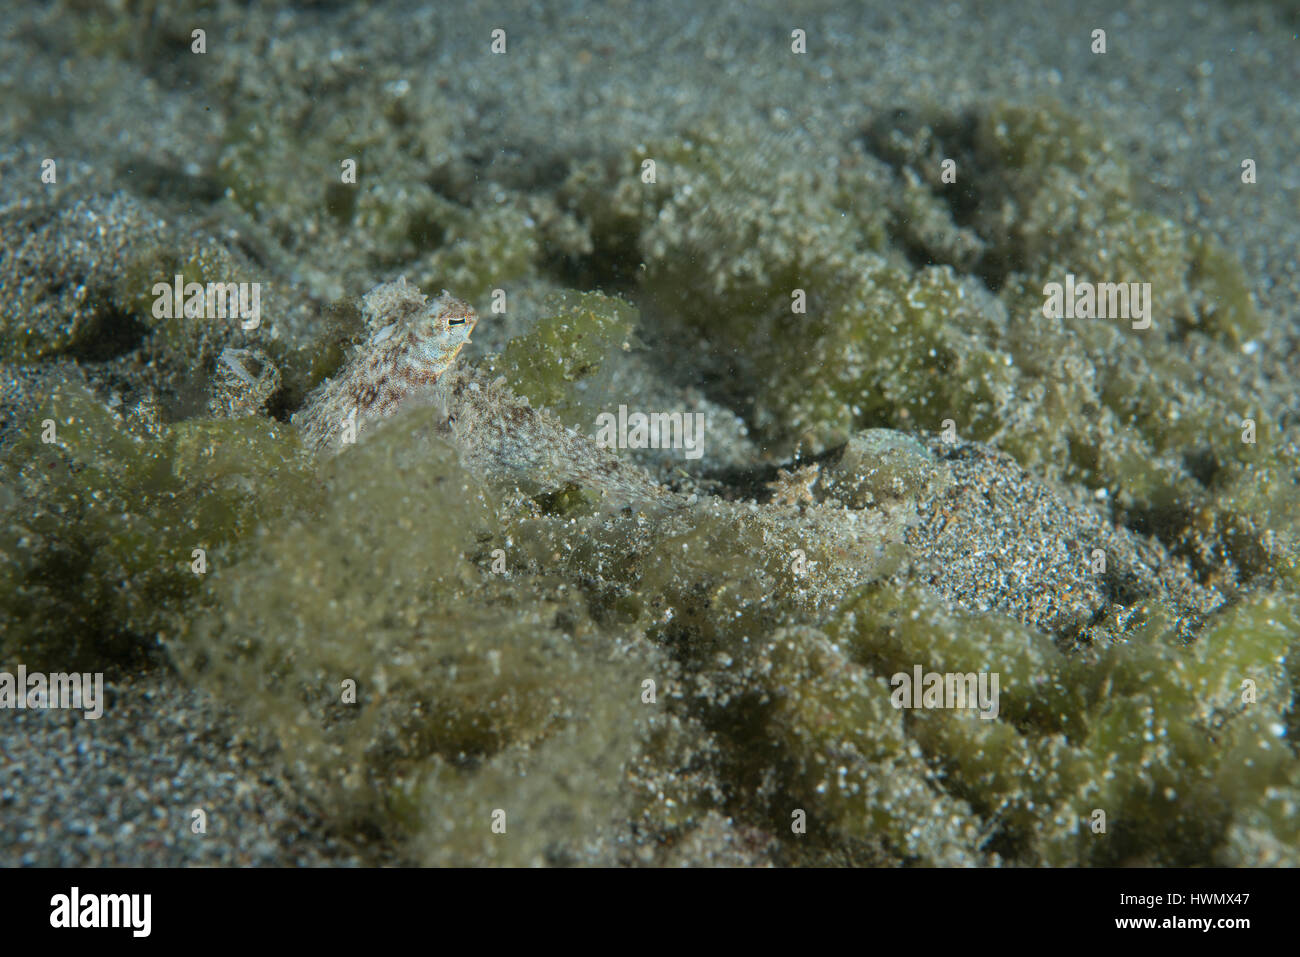 The eye of a coconut octopus, Amphioctopus marginatus, camouflaged in the seabed, Anilao, Luzon, Guimaras Strait, Philippines Stock Photo